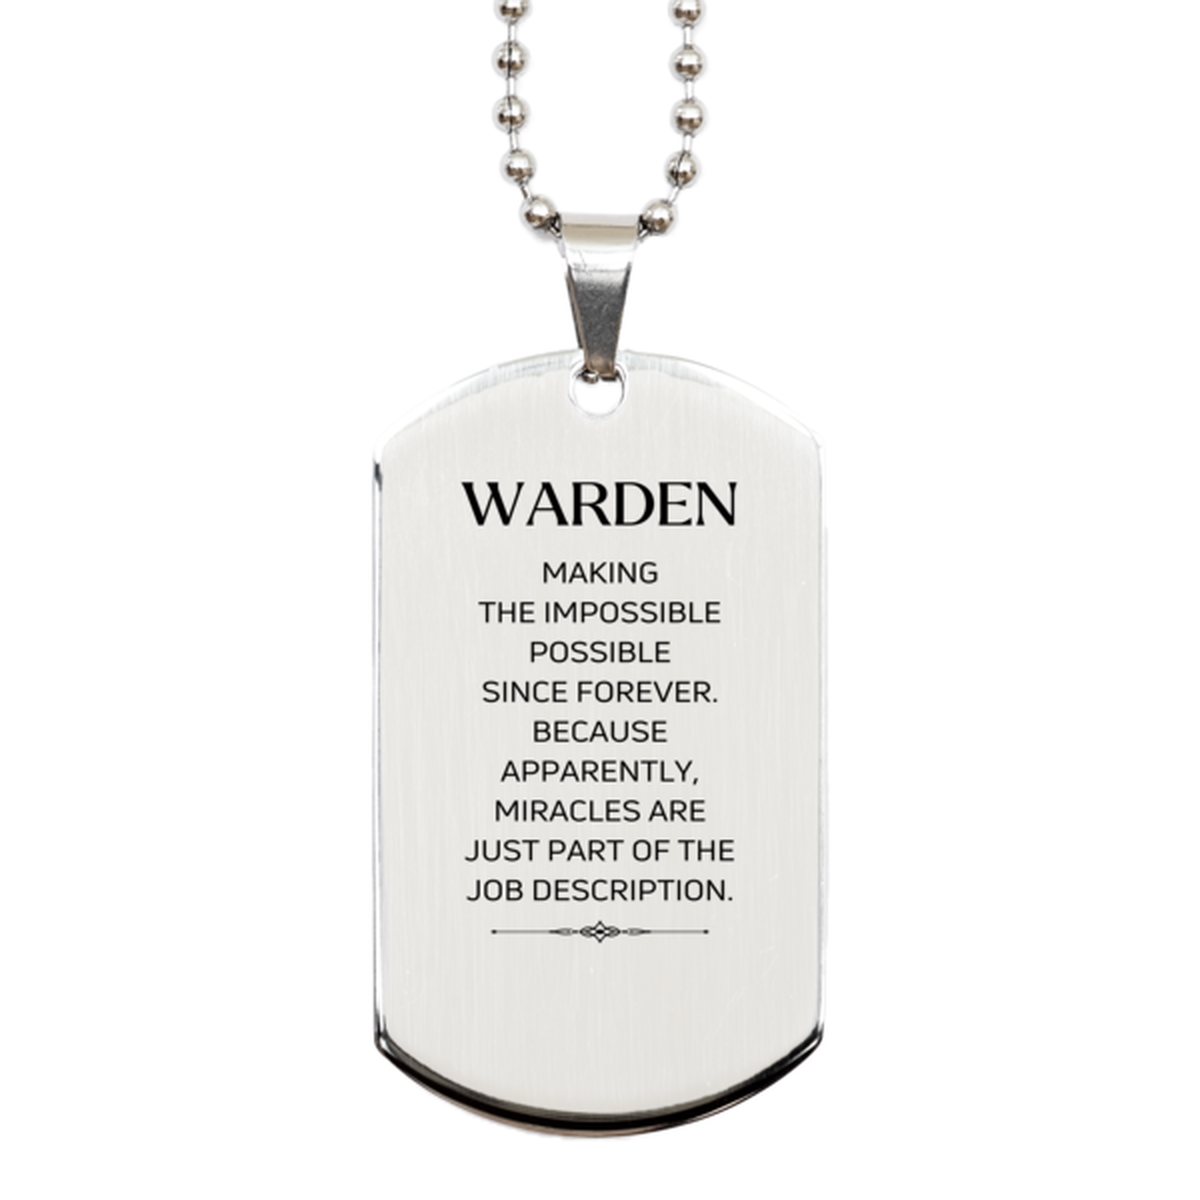 Funny Warden Gifts, Miracles are just part of the job description, Inspirational Birthday Silver Dog Tag For Warden, Men, Women, Coworkers, Friends, Boss